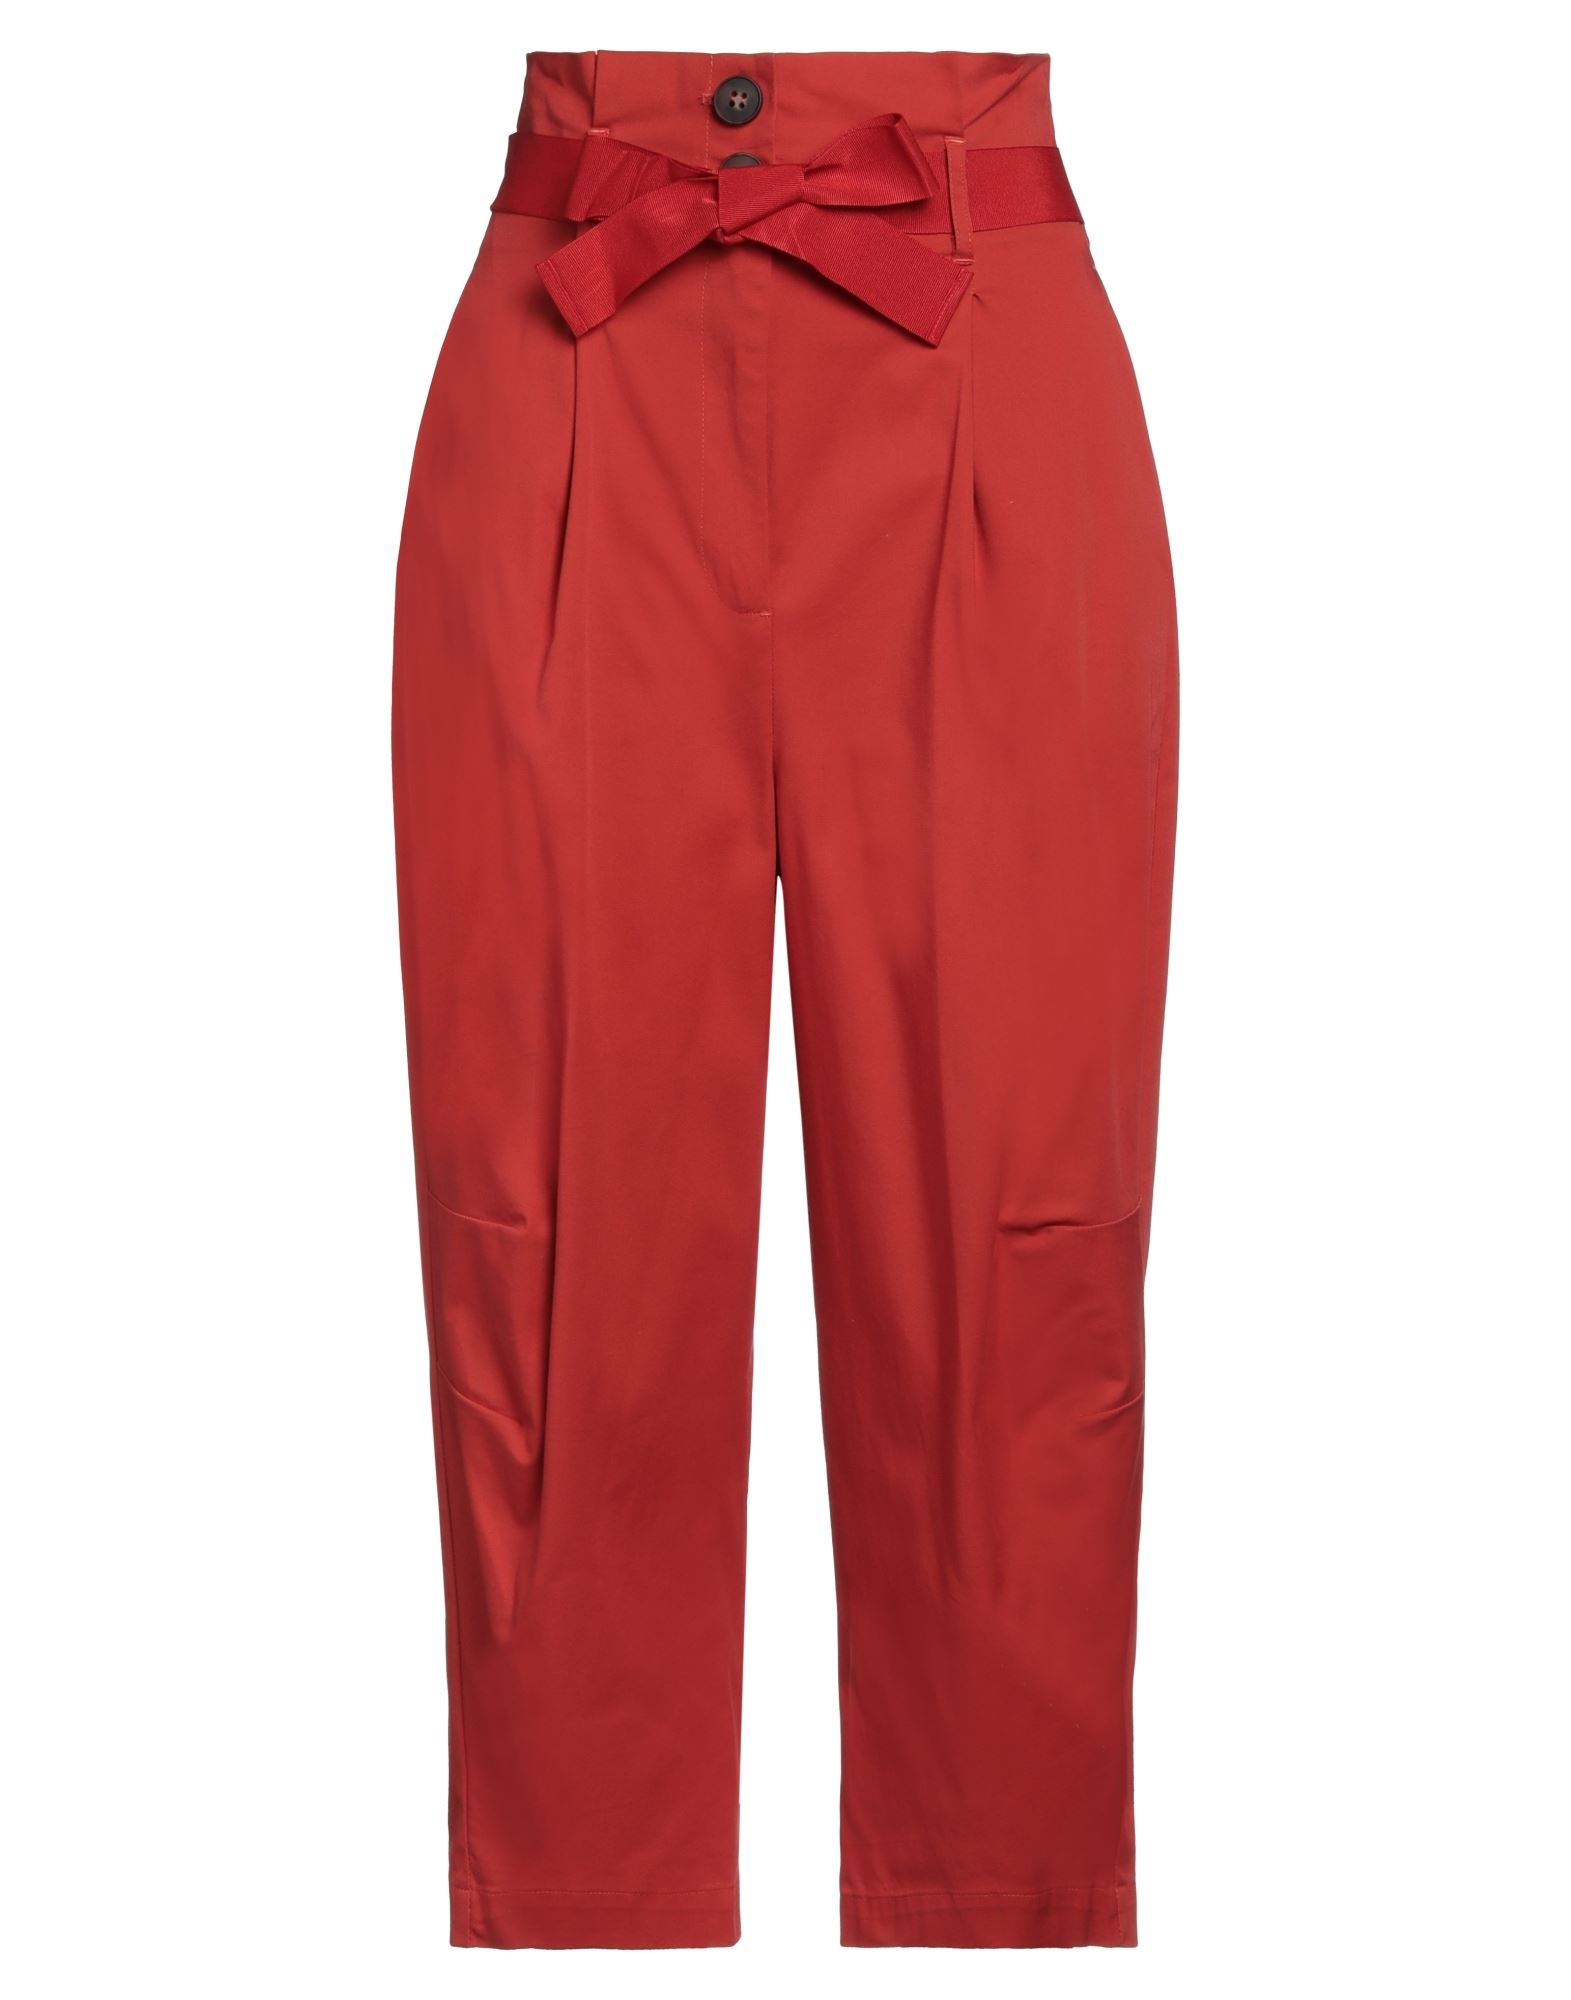 Rue 8isquit Pants In Red